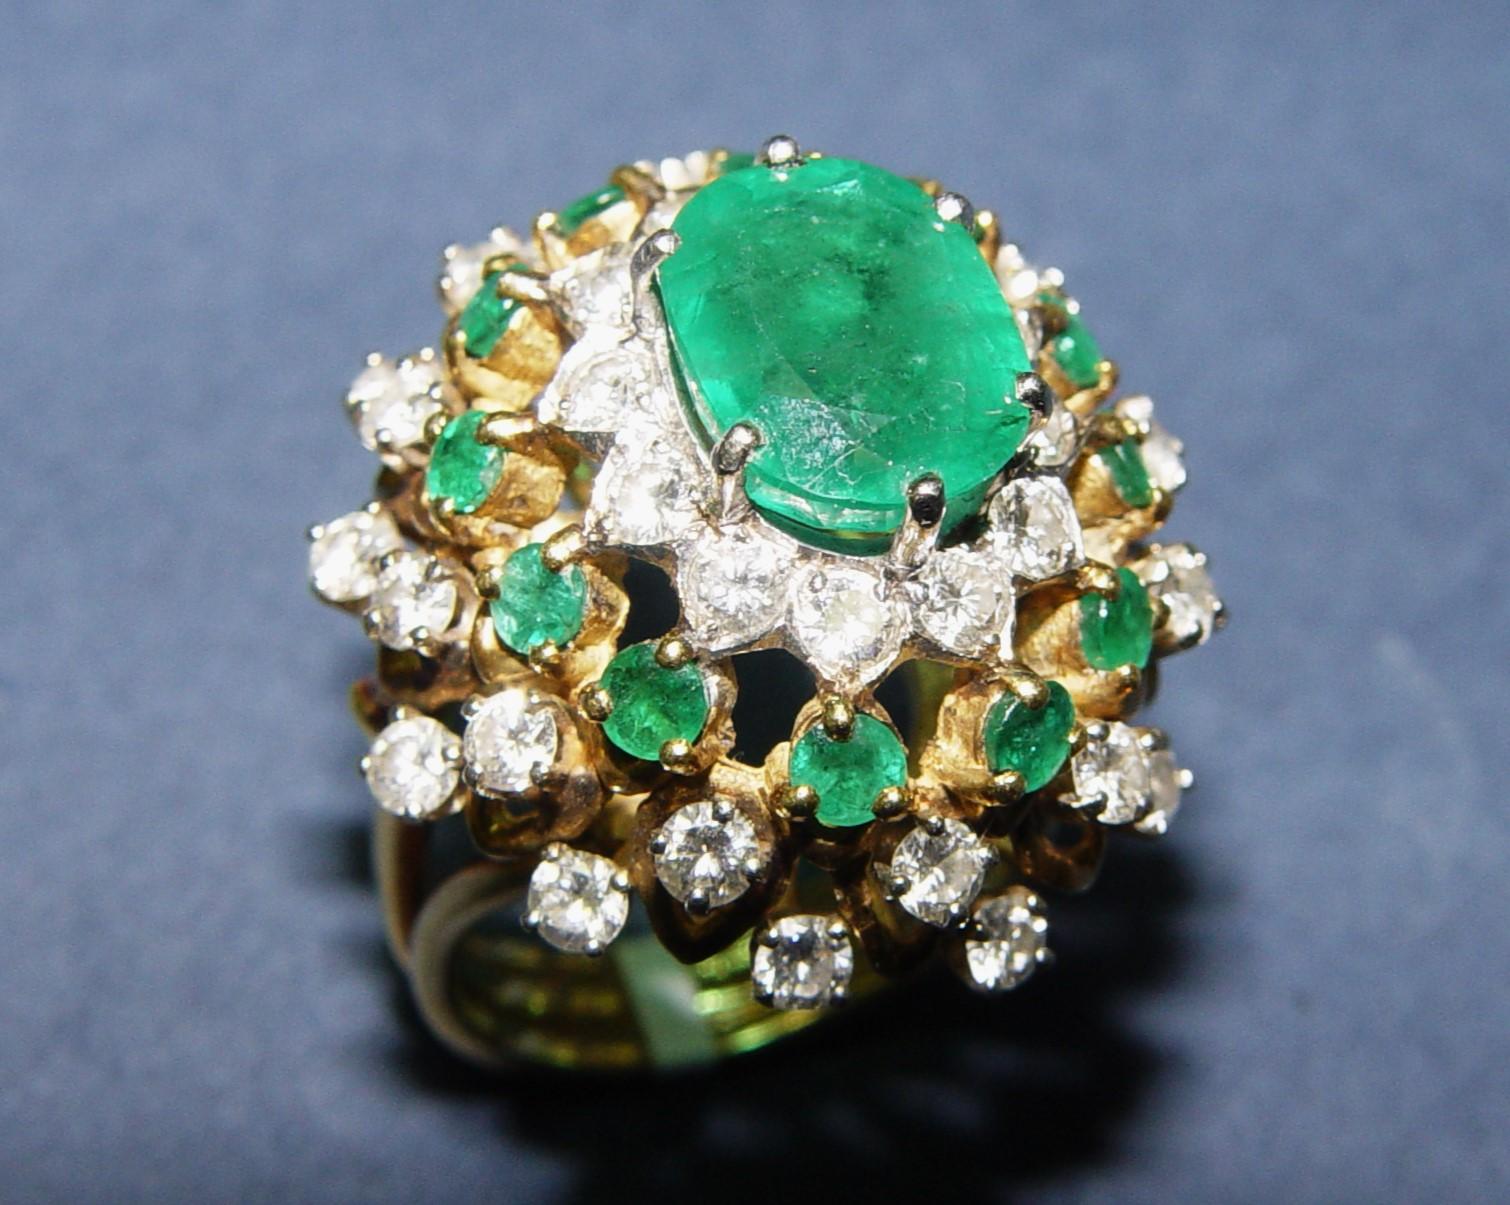 Vintage cocktail ring most likely from 1950's. Ring prong set with One Oval Cut natural Emerald weighing approximately 3.50CT (carat weight is accurate. Center stone measures 11.1x8.45x5.21MM deep, emerald exhibits saturated green green color and